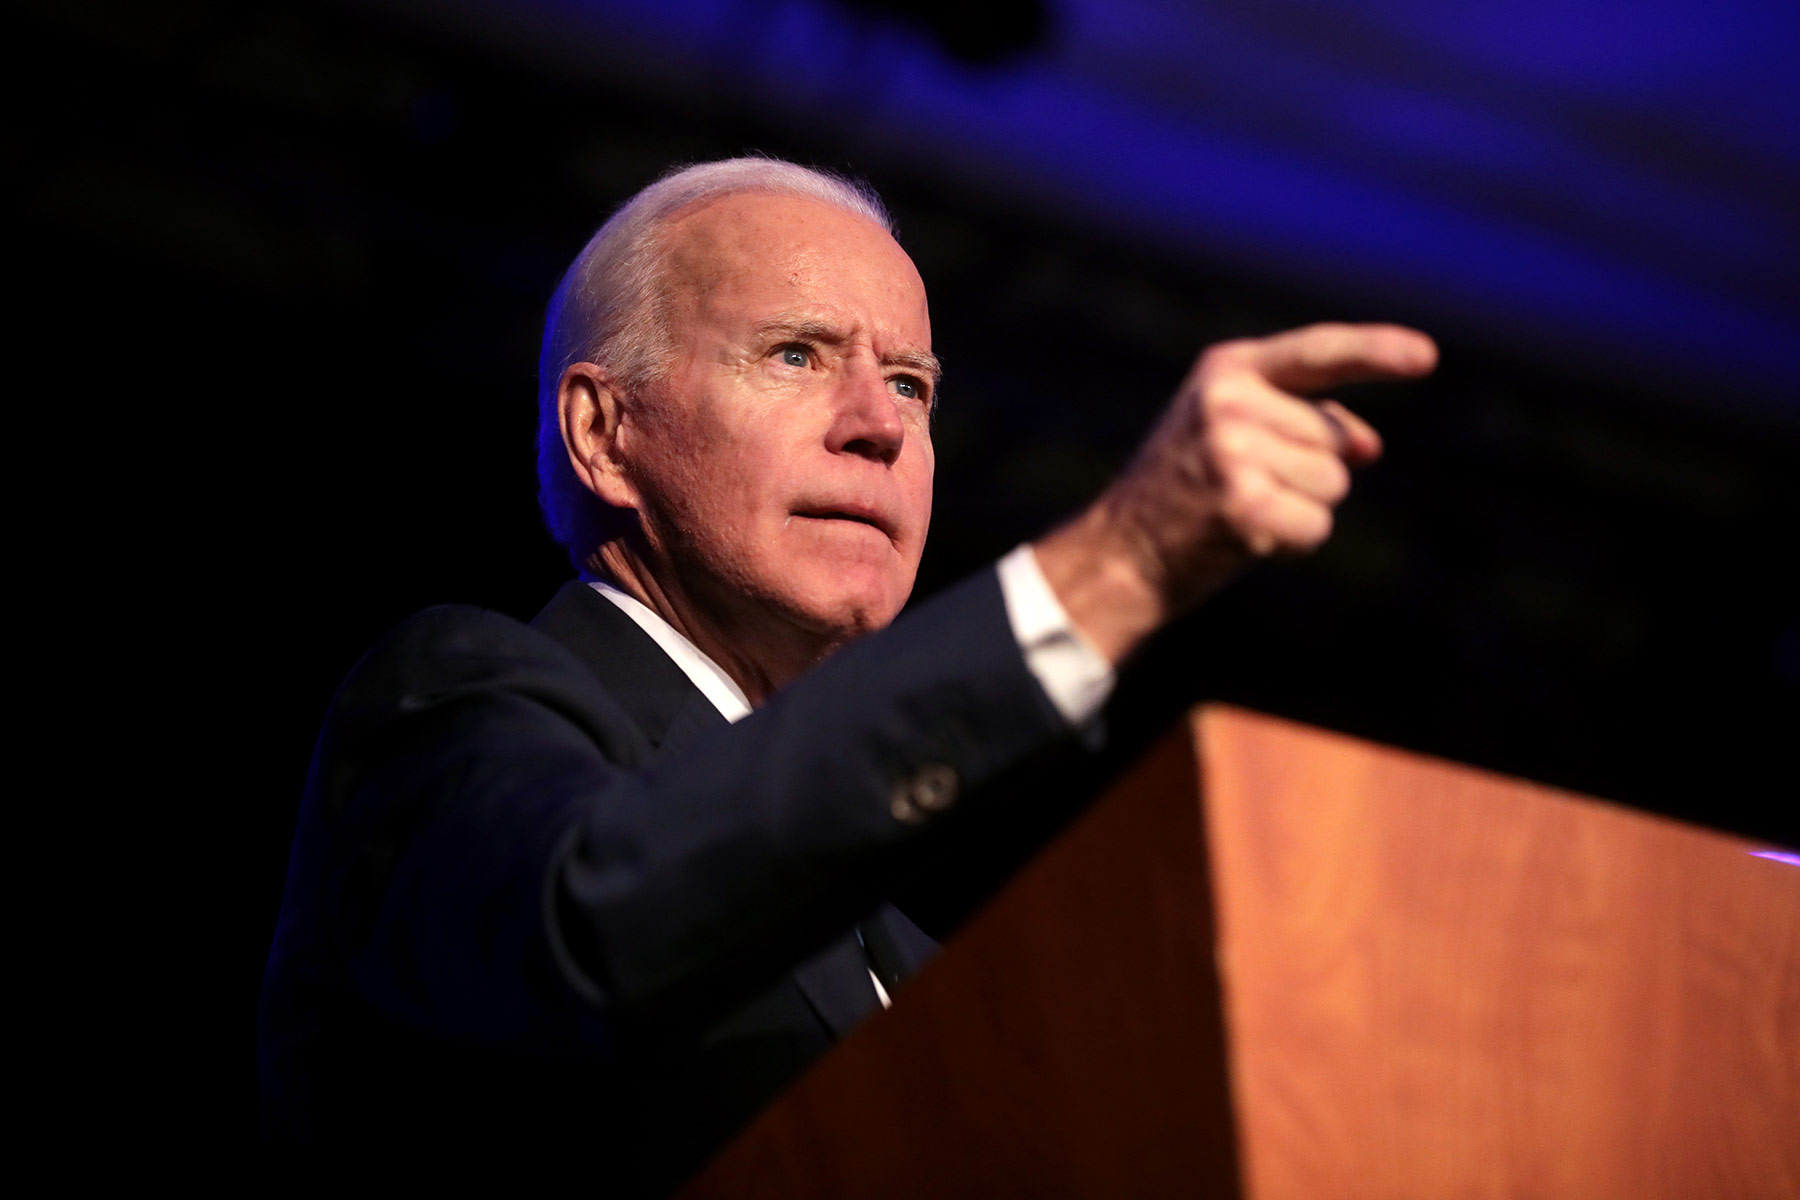 Joe Biden, Joe Biden news, news on Joe Biden, Iran nuclear deal, JCPOA, Joint Comprehensive Plan of Action, Iran news, Iran, US foreign Policy, David J. Karl